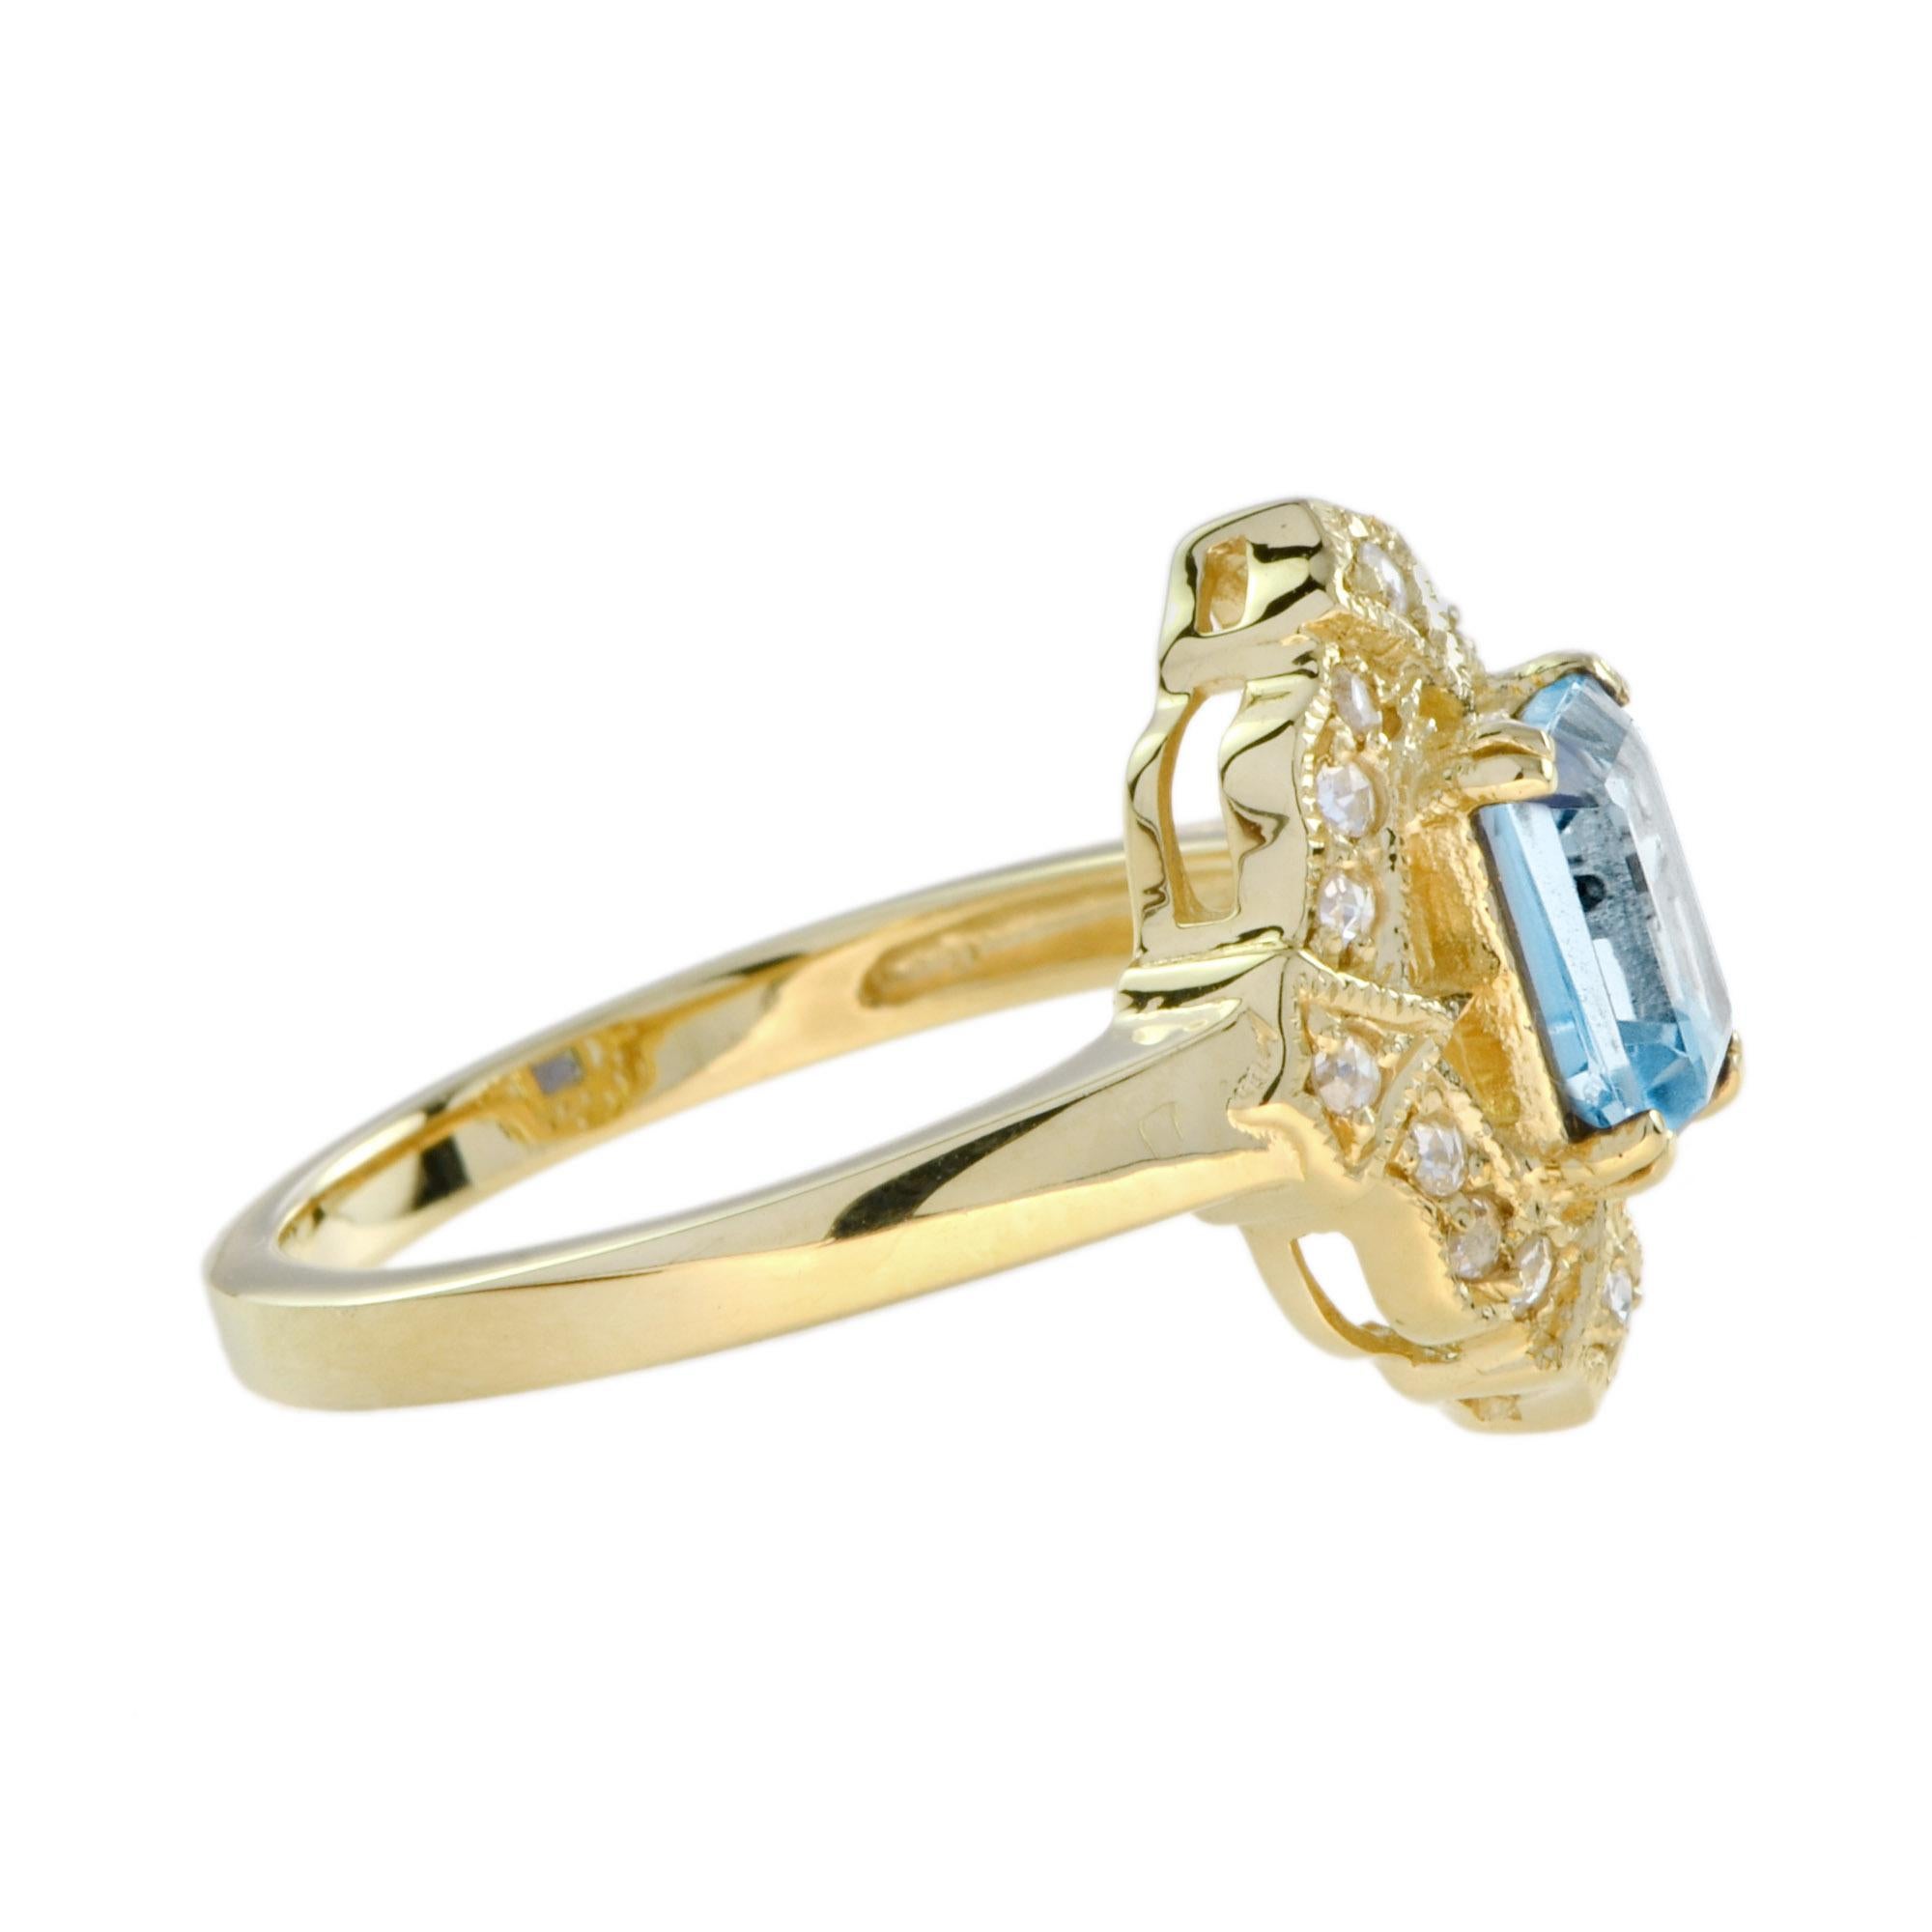 For Sale:  Emerald Cut Blue Topaz and Diamond Halo Vintage Style Ring in 14K Yellow Gold 7